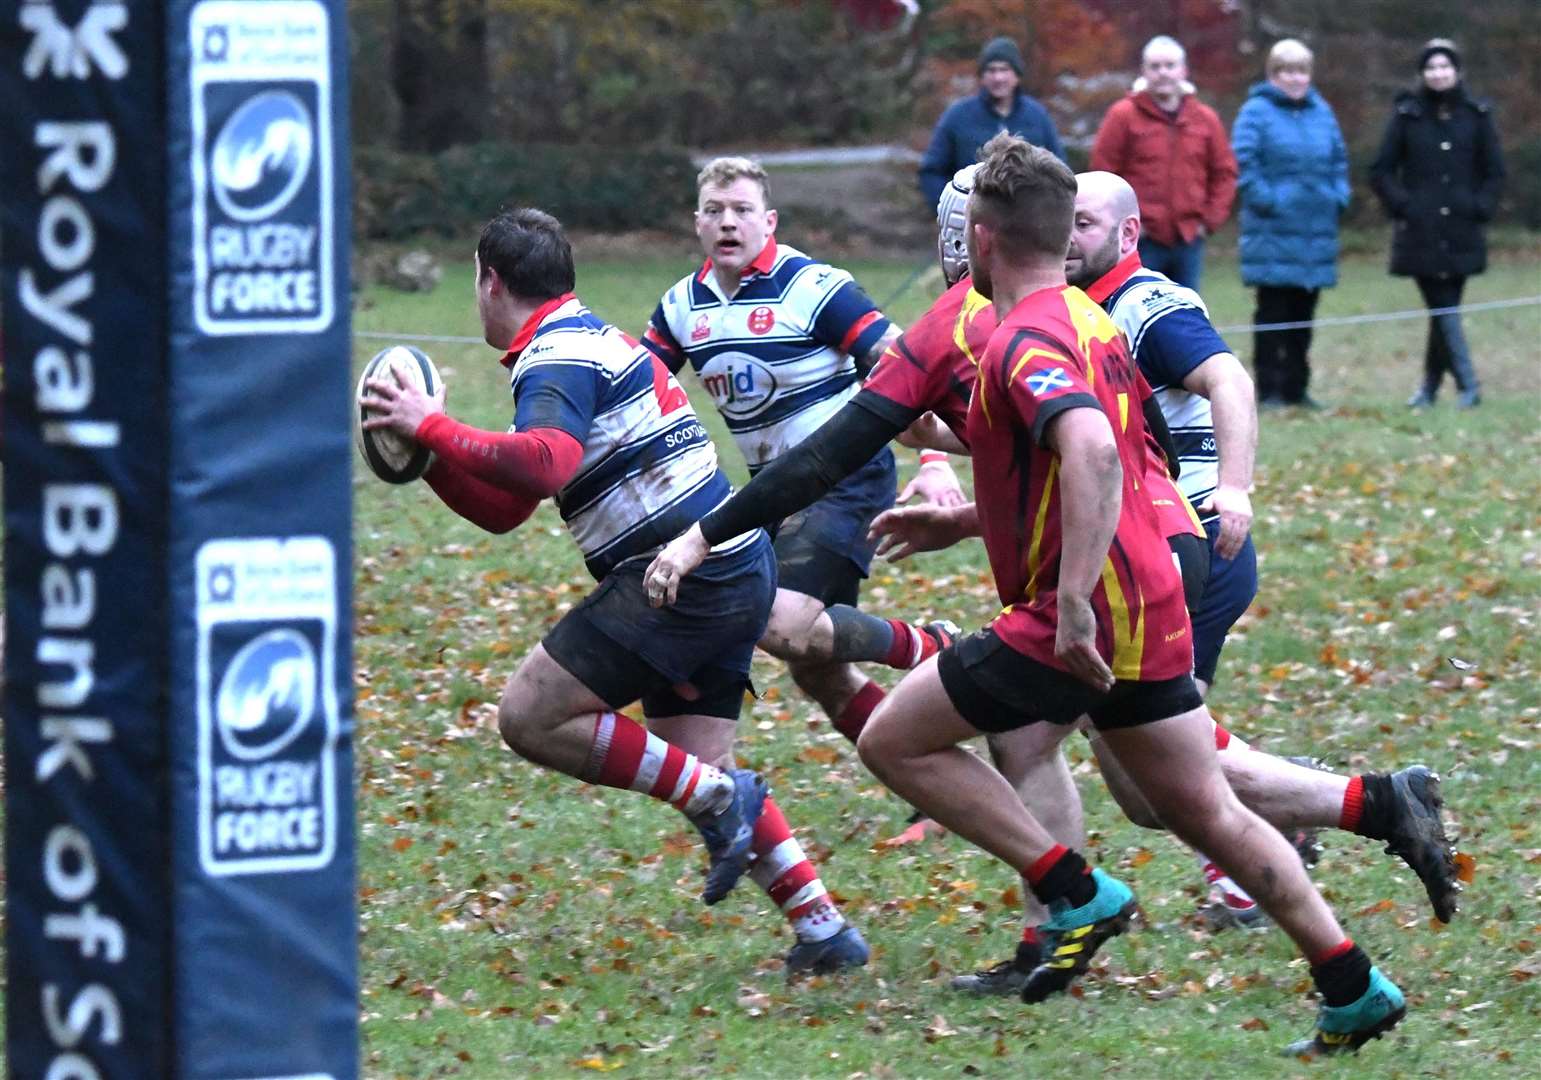 Cameron Hughes looks to offload to Lewis Scott to score. Picture: James Officer